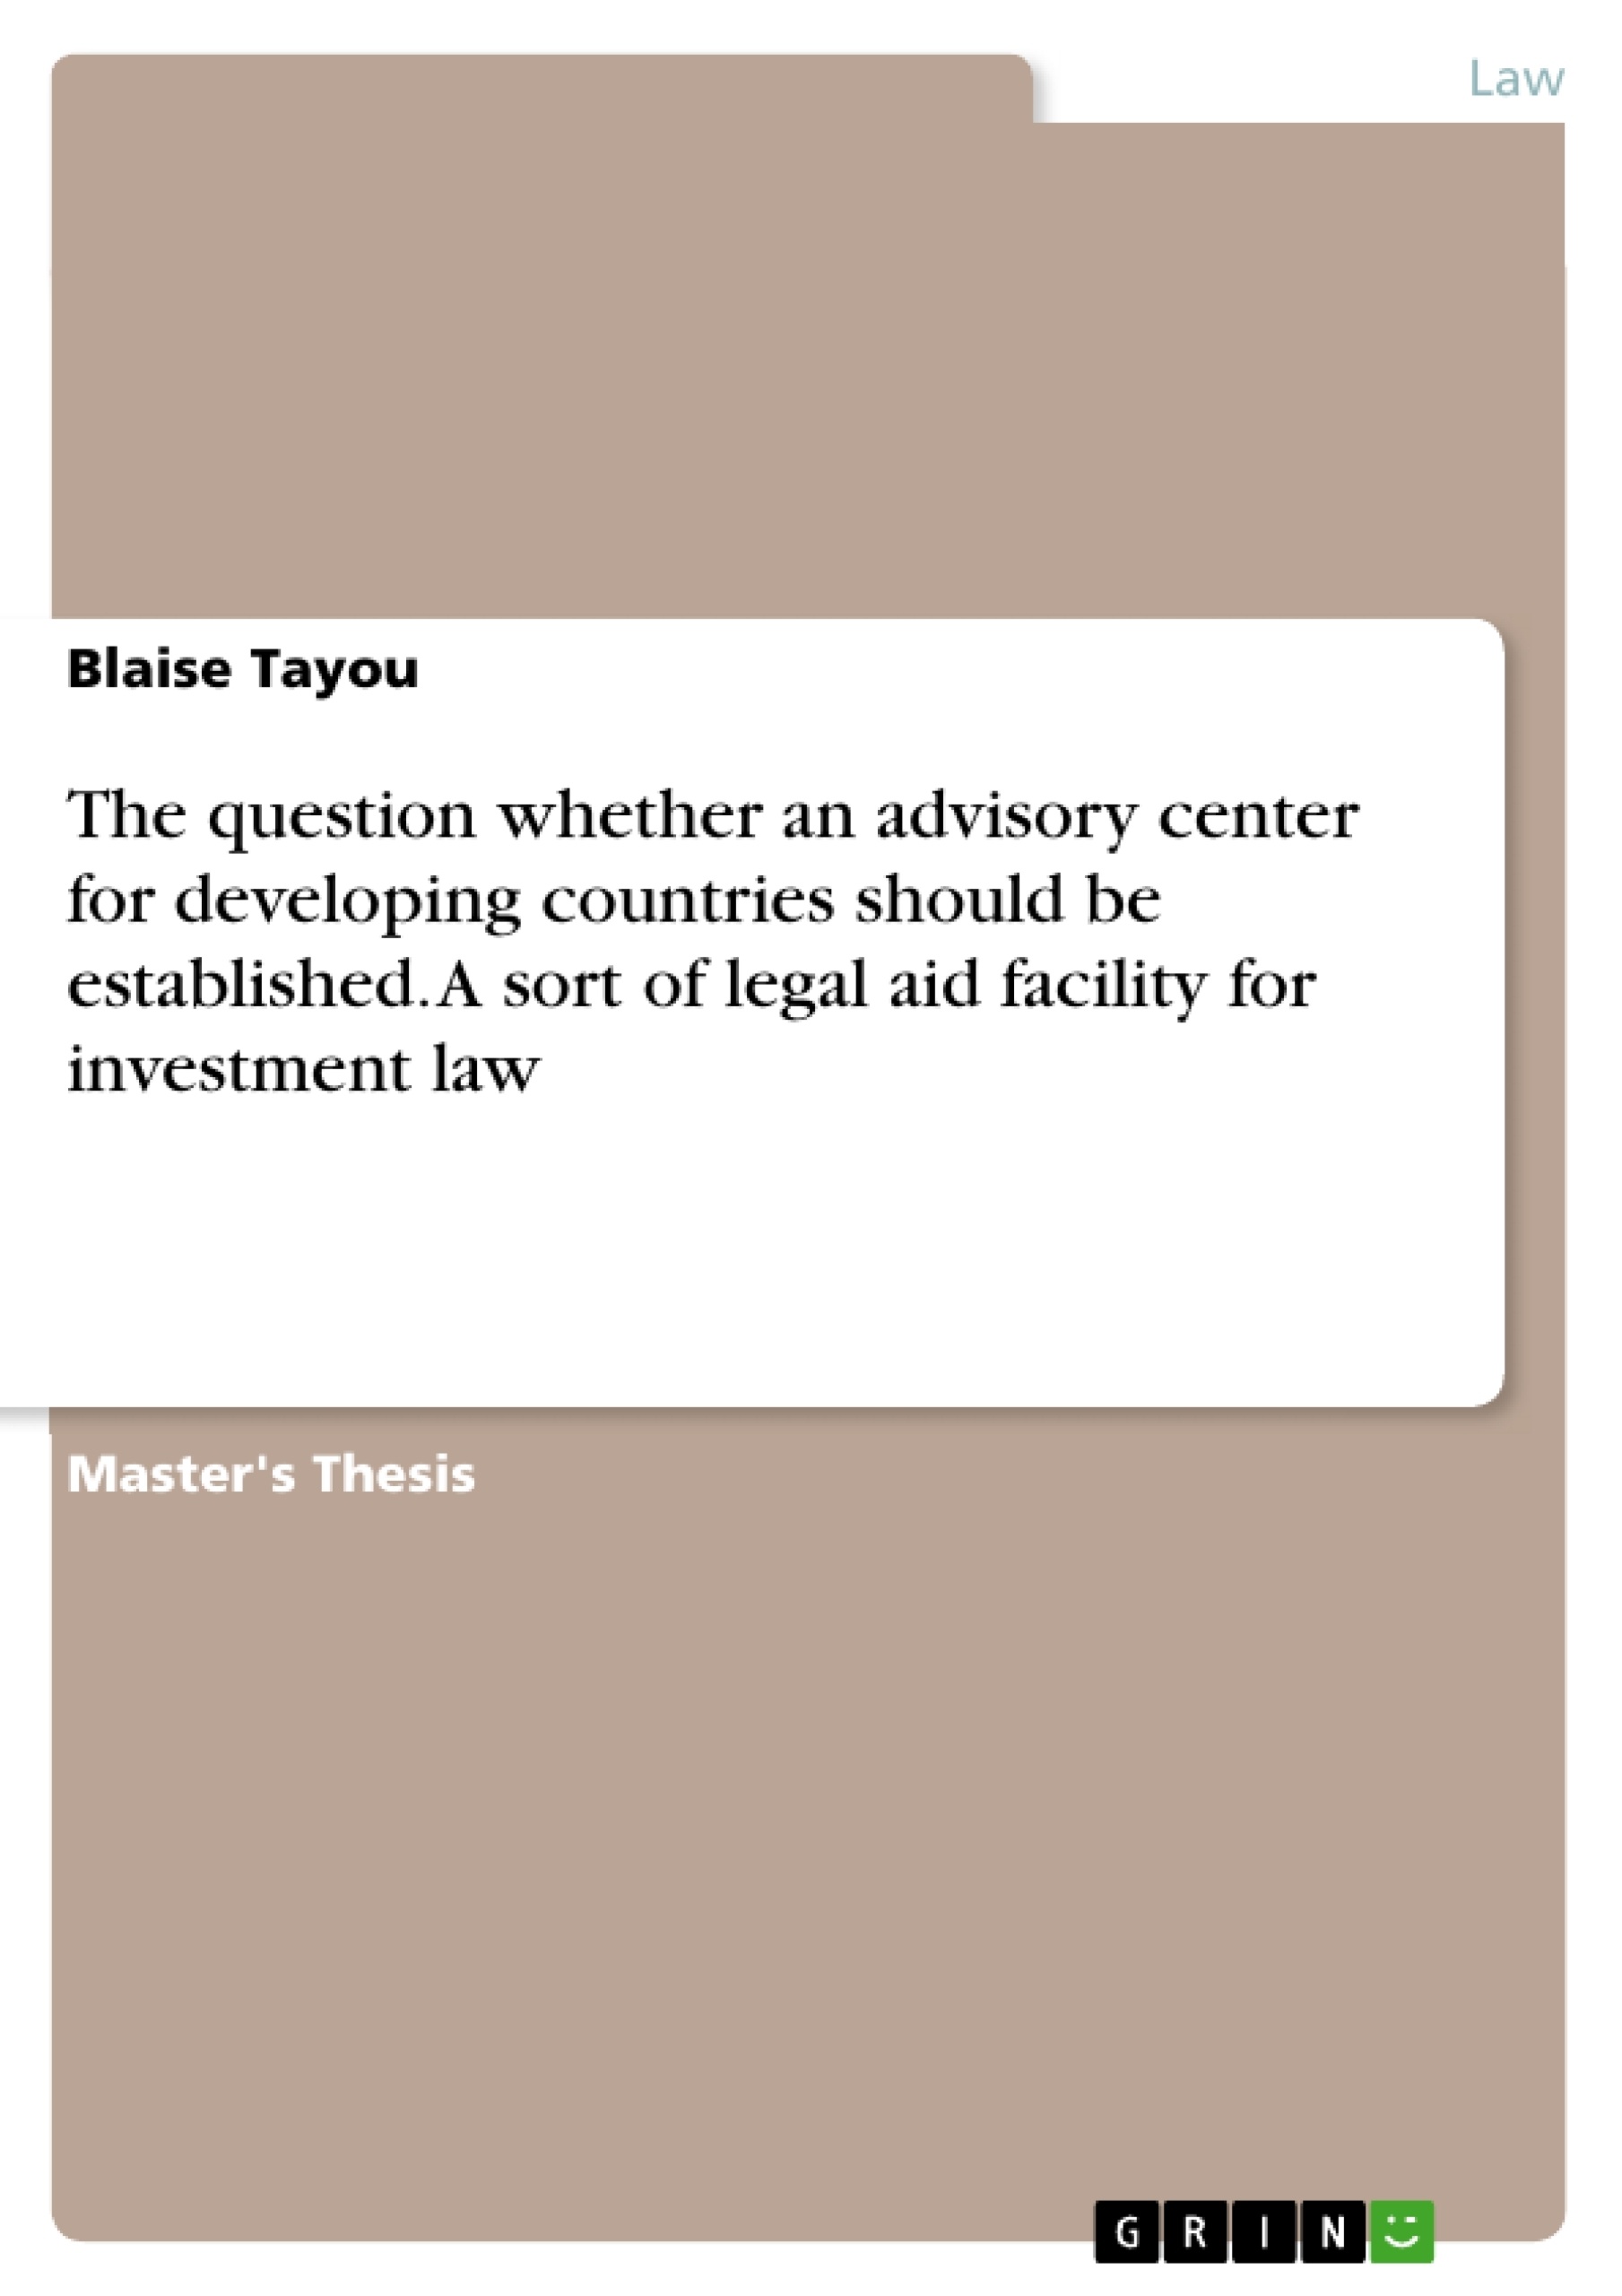 Title: The question whether an advisory center for developing countries should be established. A sort of legal aid facility for investment law